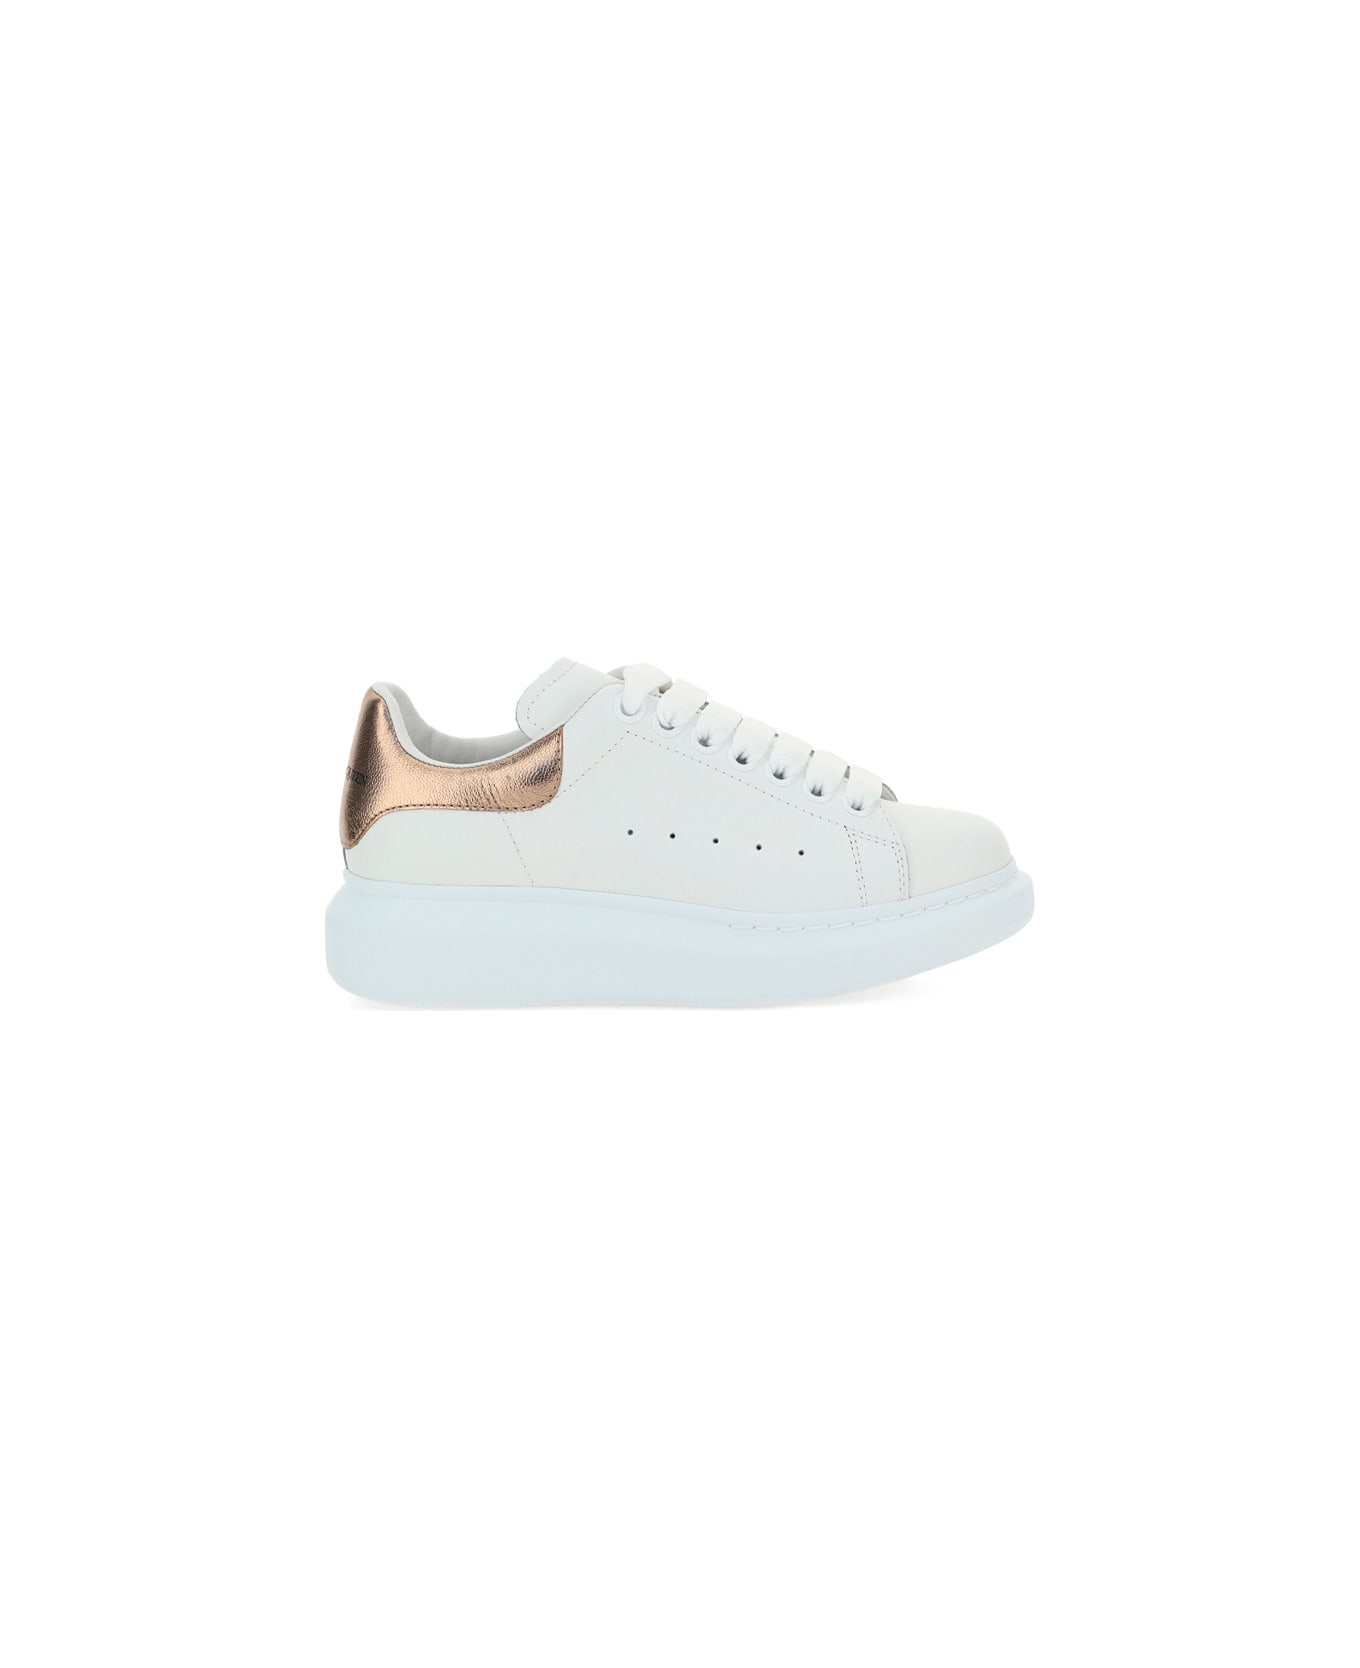 Alexander McQueen Sneakers - White/rose Gold 171